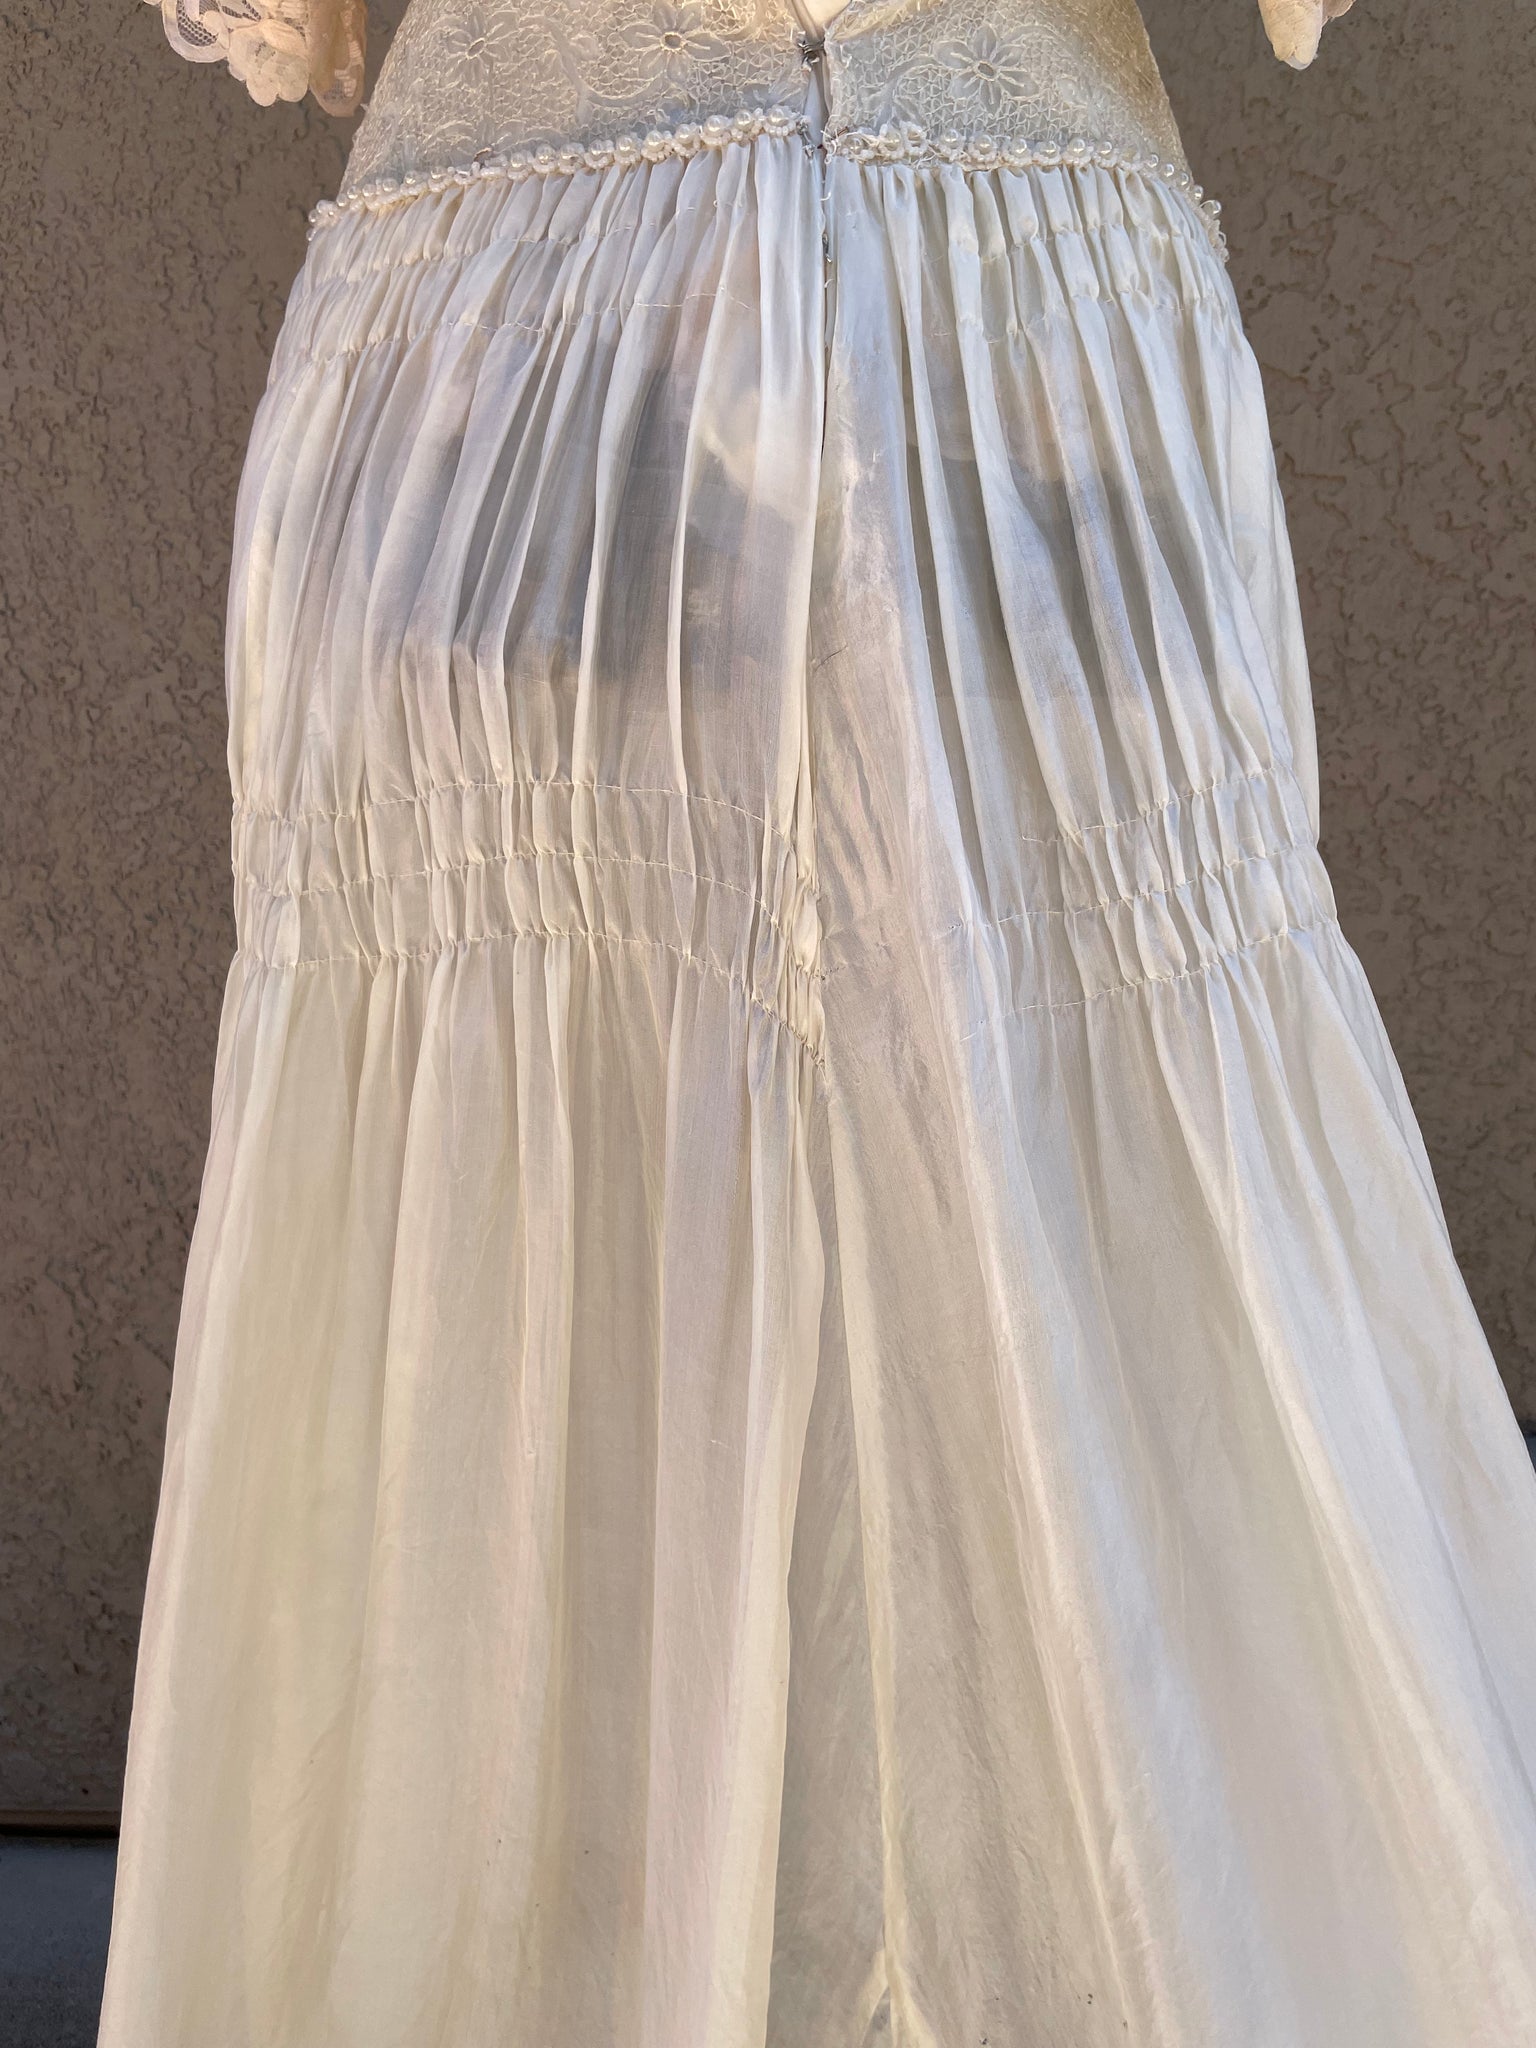 Antique 1900s Trained Embroidered Silk Bridal Skirt